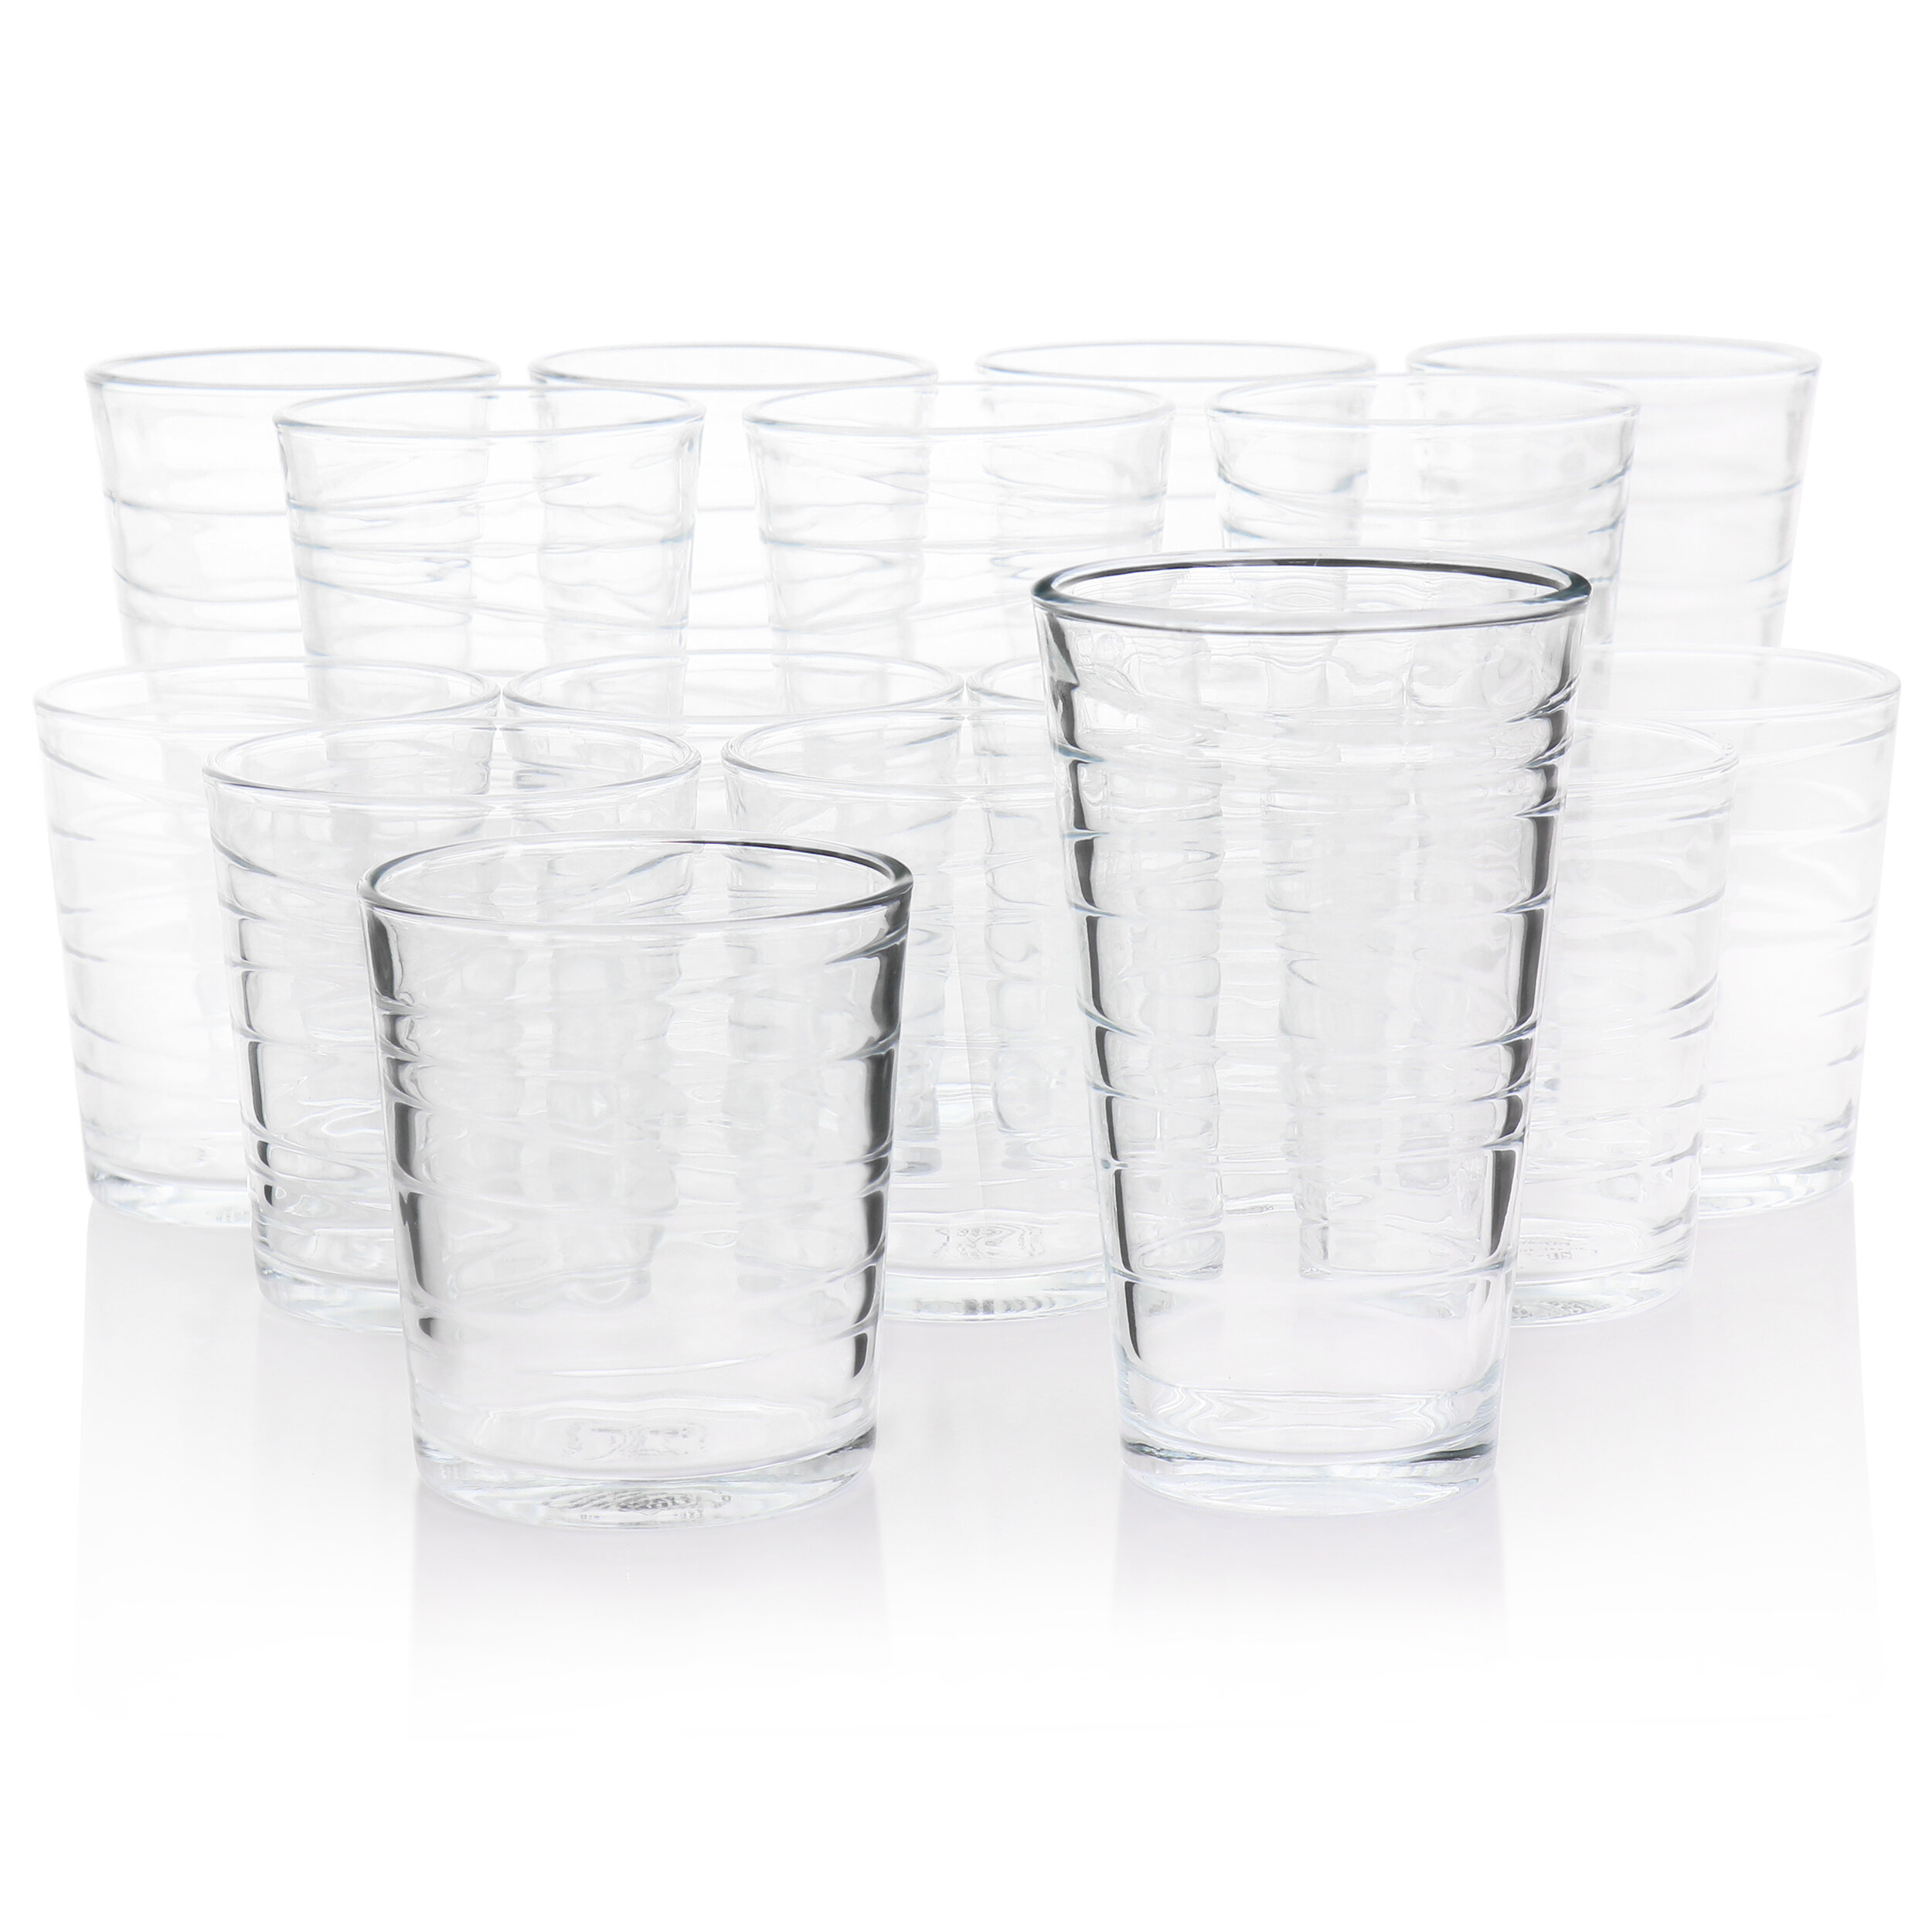 Gibson Home Great Foundations Tumbler and Double Old-Fashioned